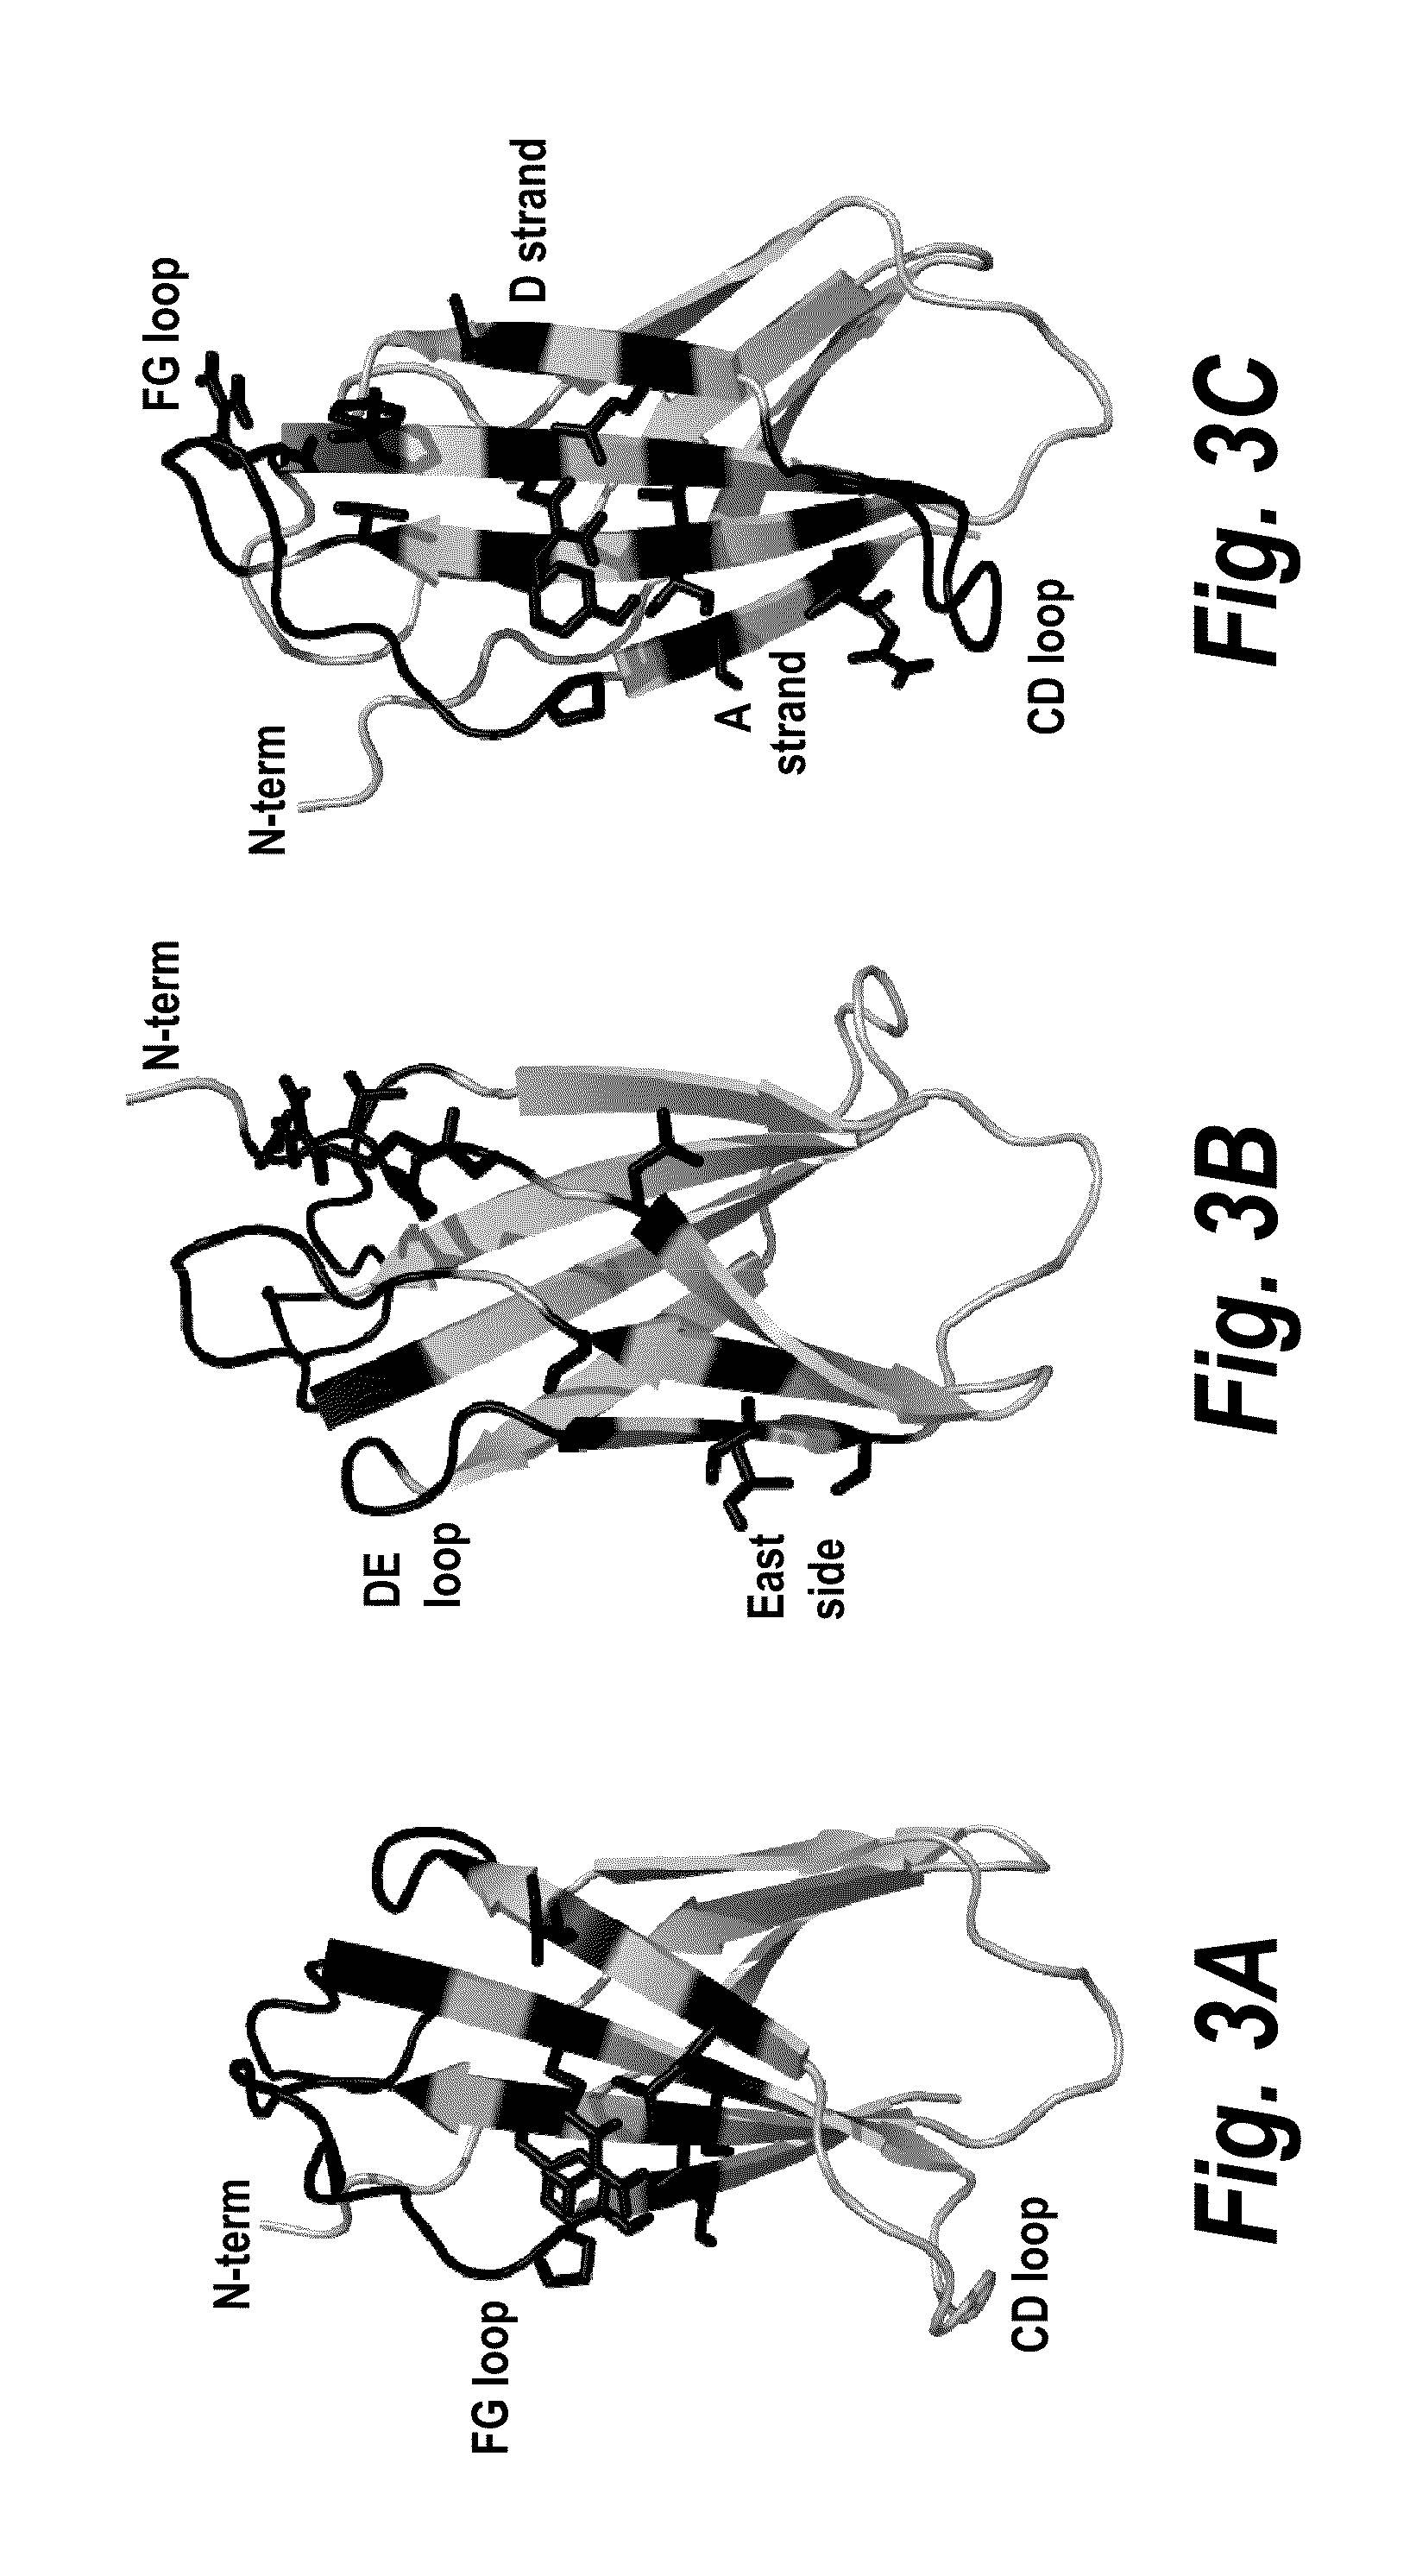 Fibronectin Binding Domains with Reduced Immunogenicity